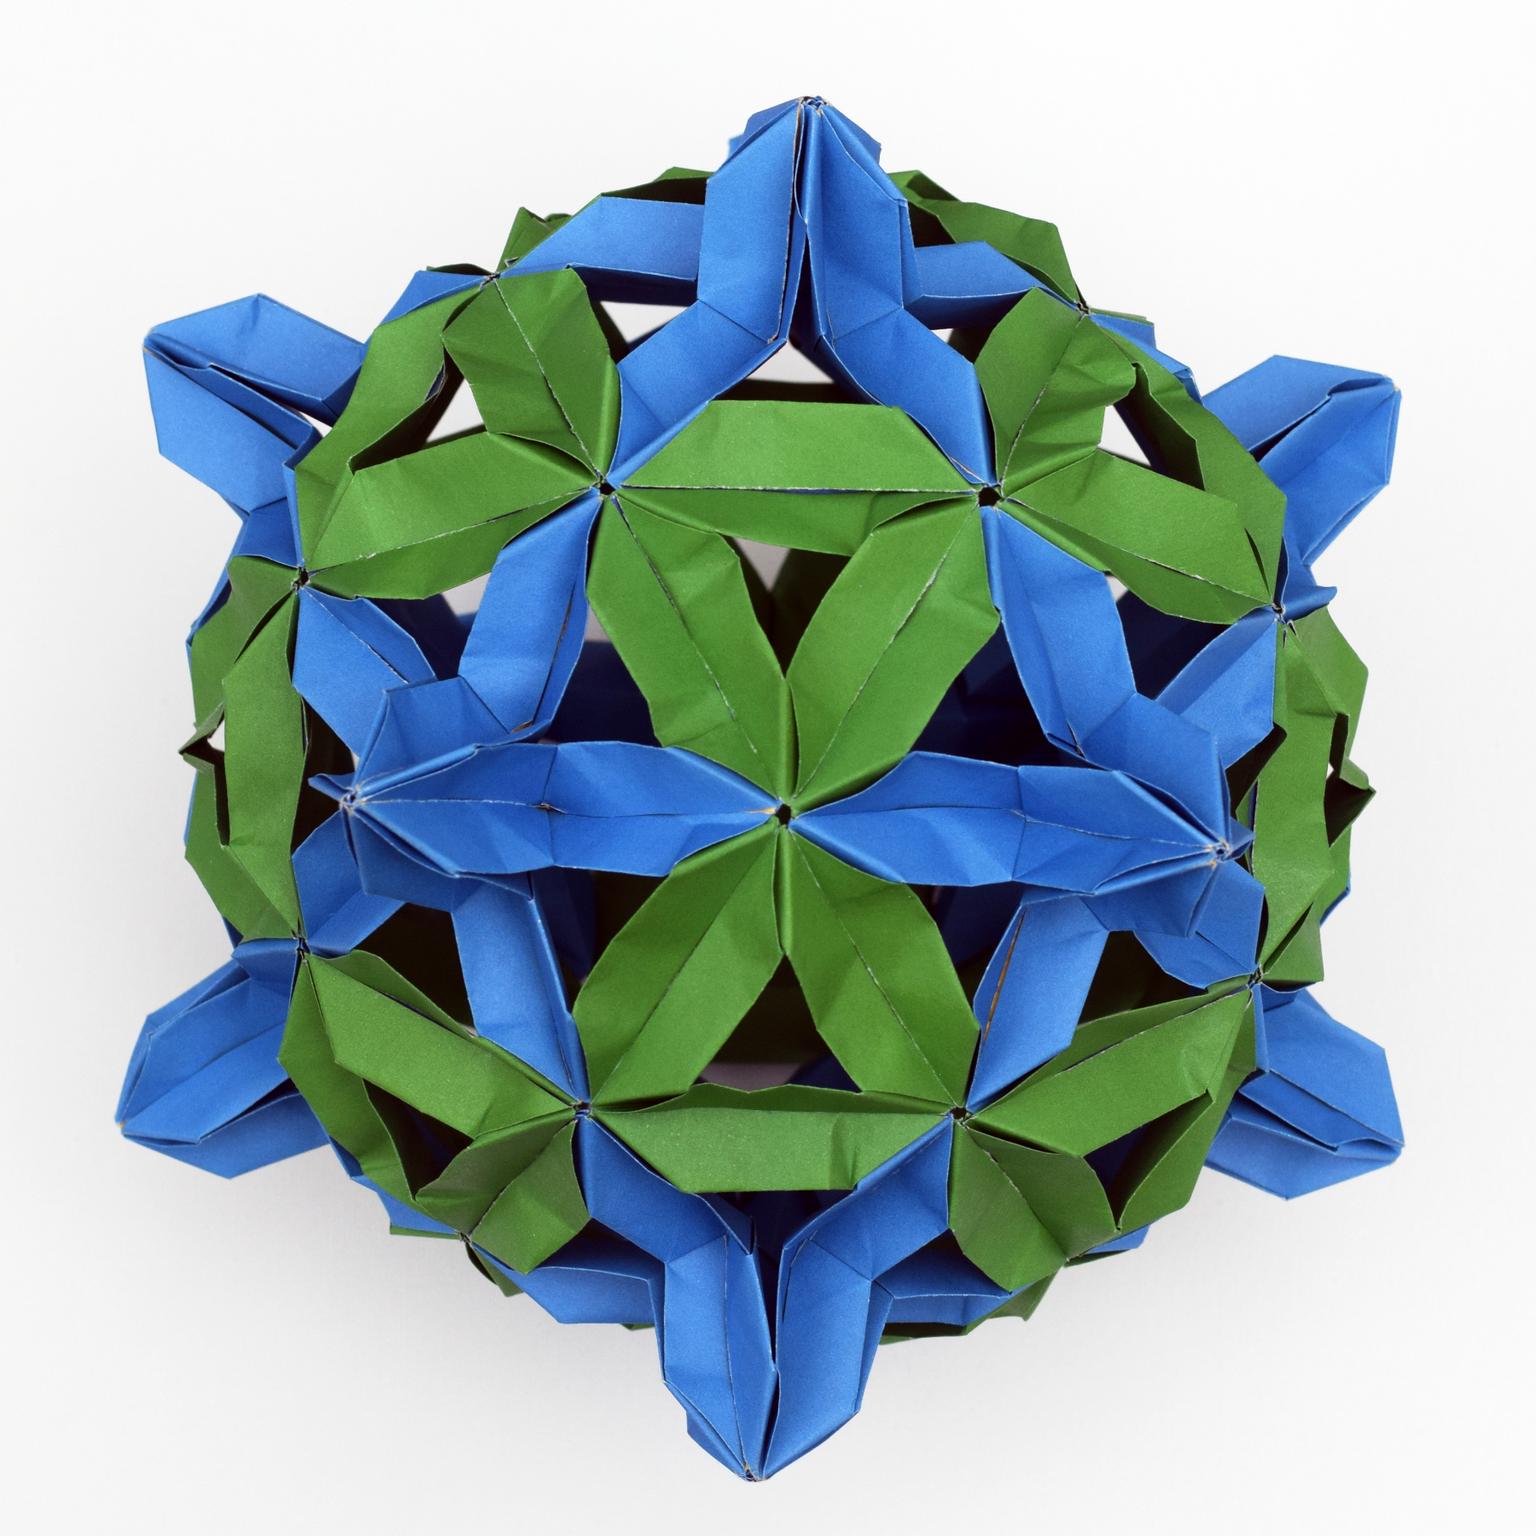 Image for entry 'Compound of an Icosahedron and an Icosidodecahedron'